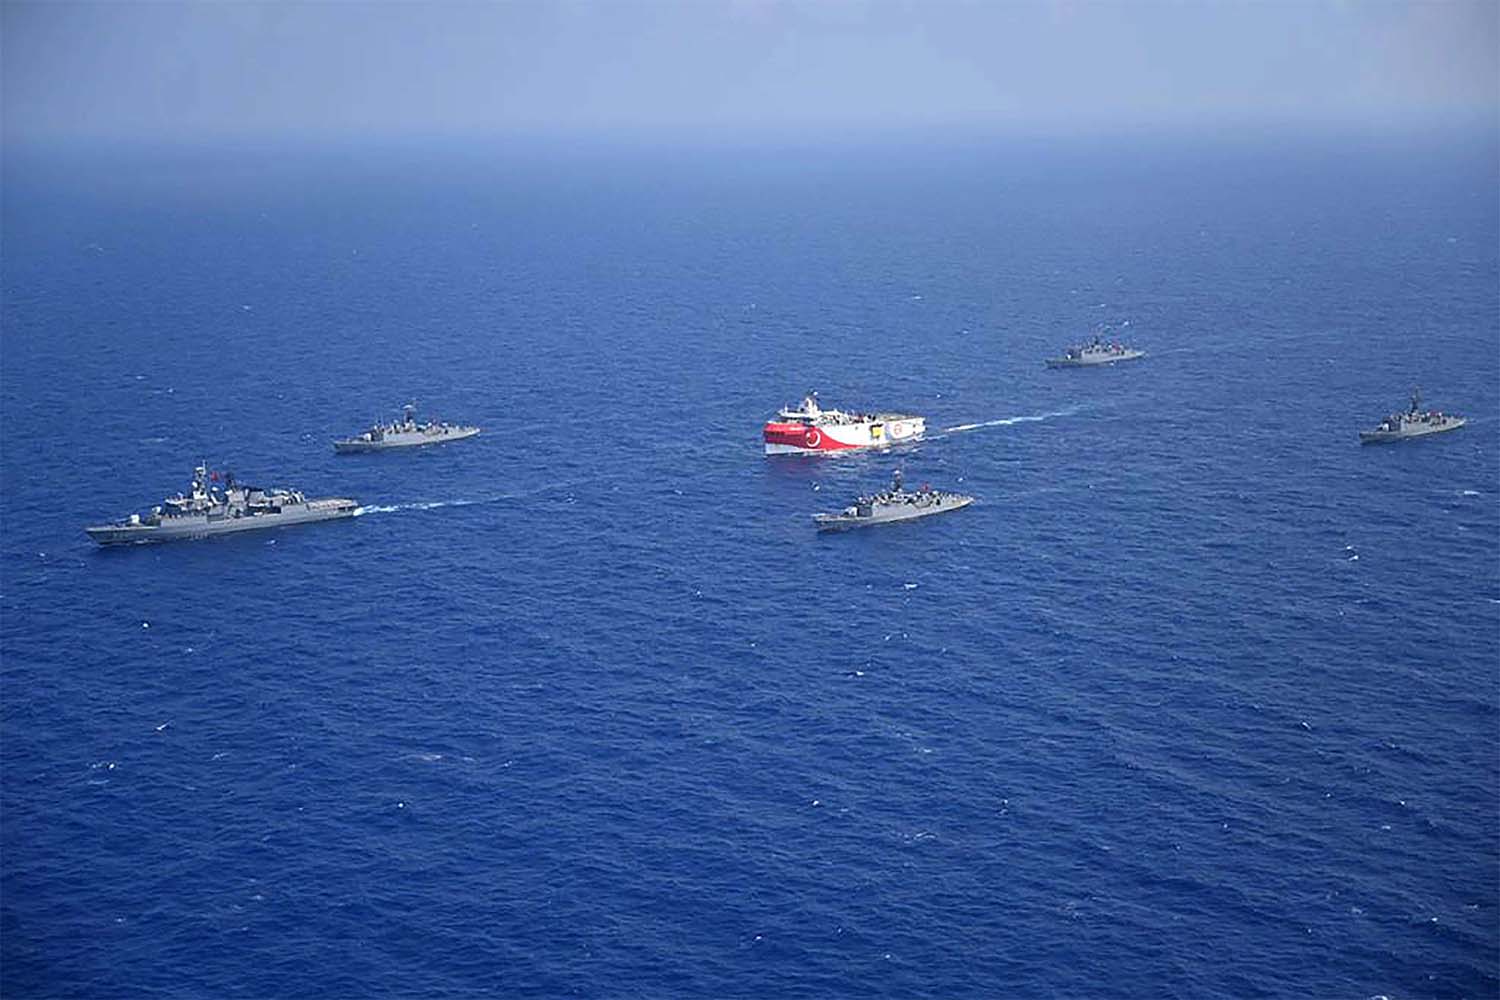 Turkish seismic research vessel 'Oruc Reis' (C) as it is escorted by Turkish Naval ships in the Mediterranean